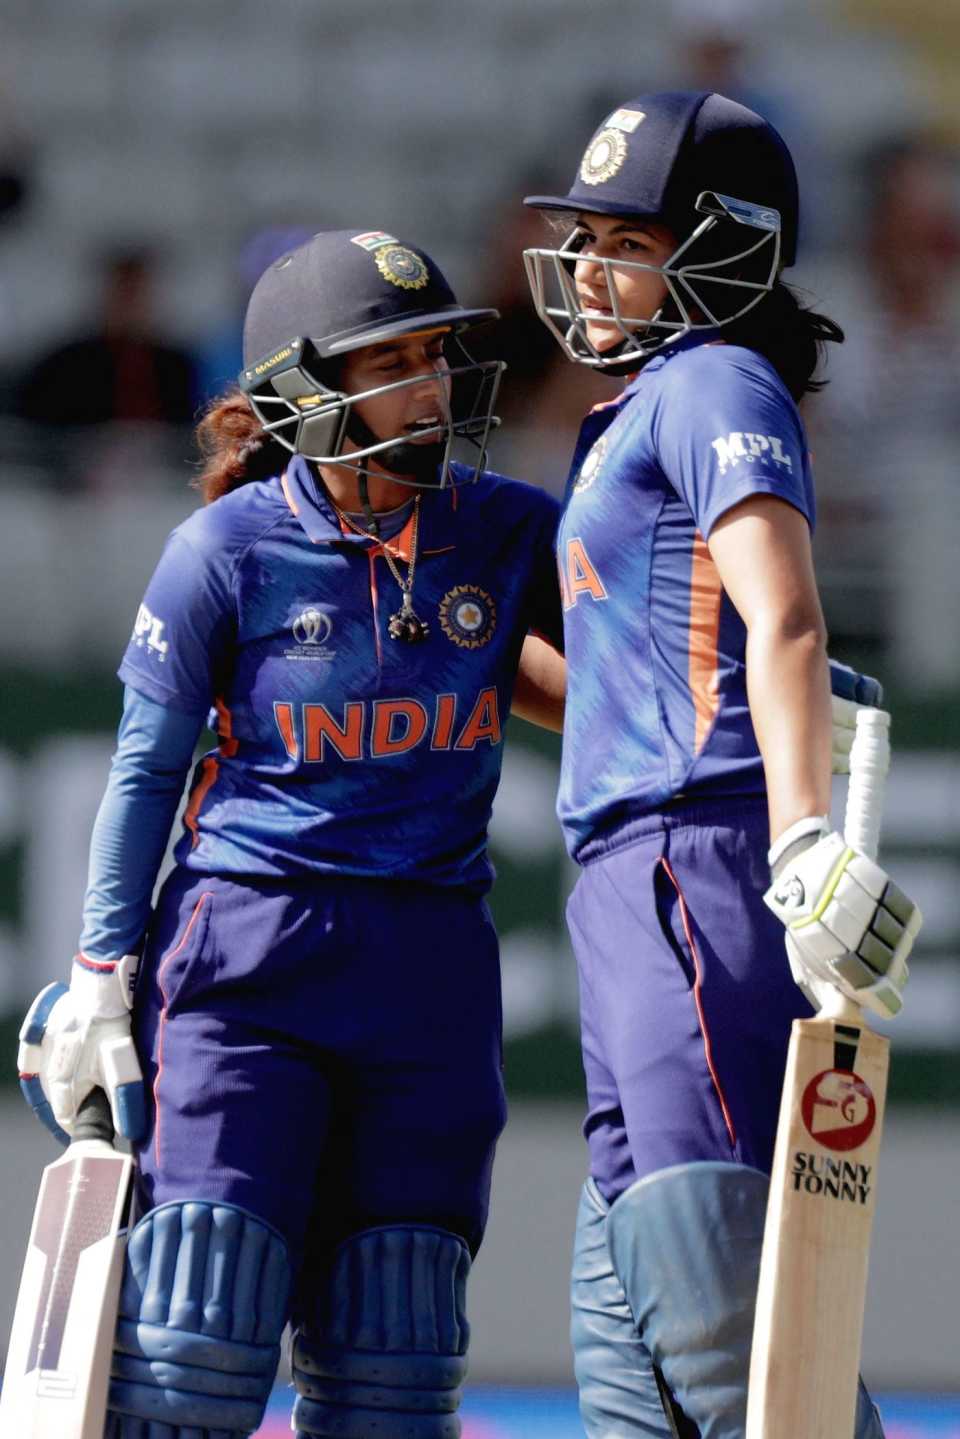 Mithali Raj and Yastika Bhatia added 130 for the third wicket, Australia vs India, Women's World Cup 2022, Auckland, March 19, 2022